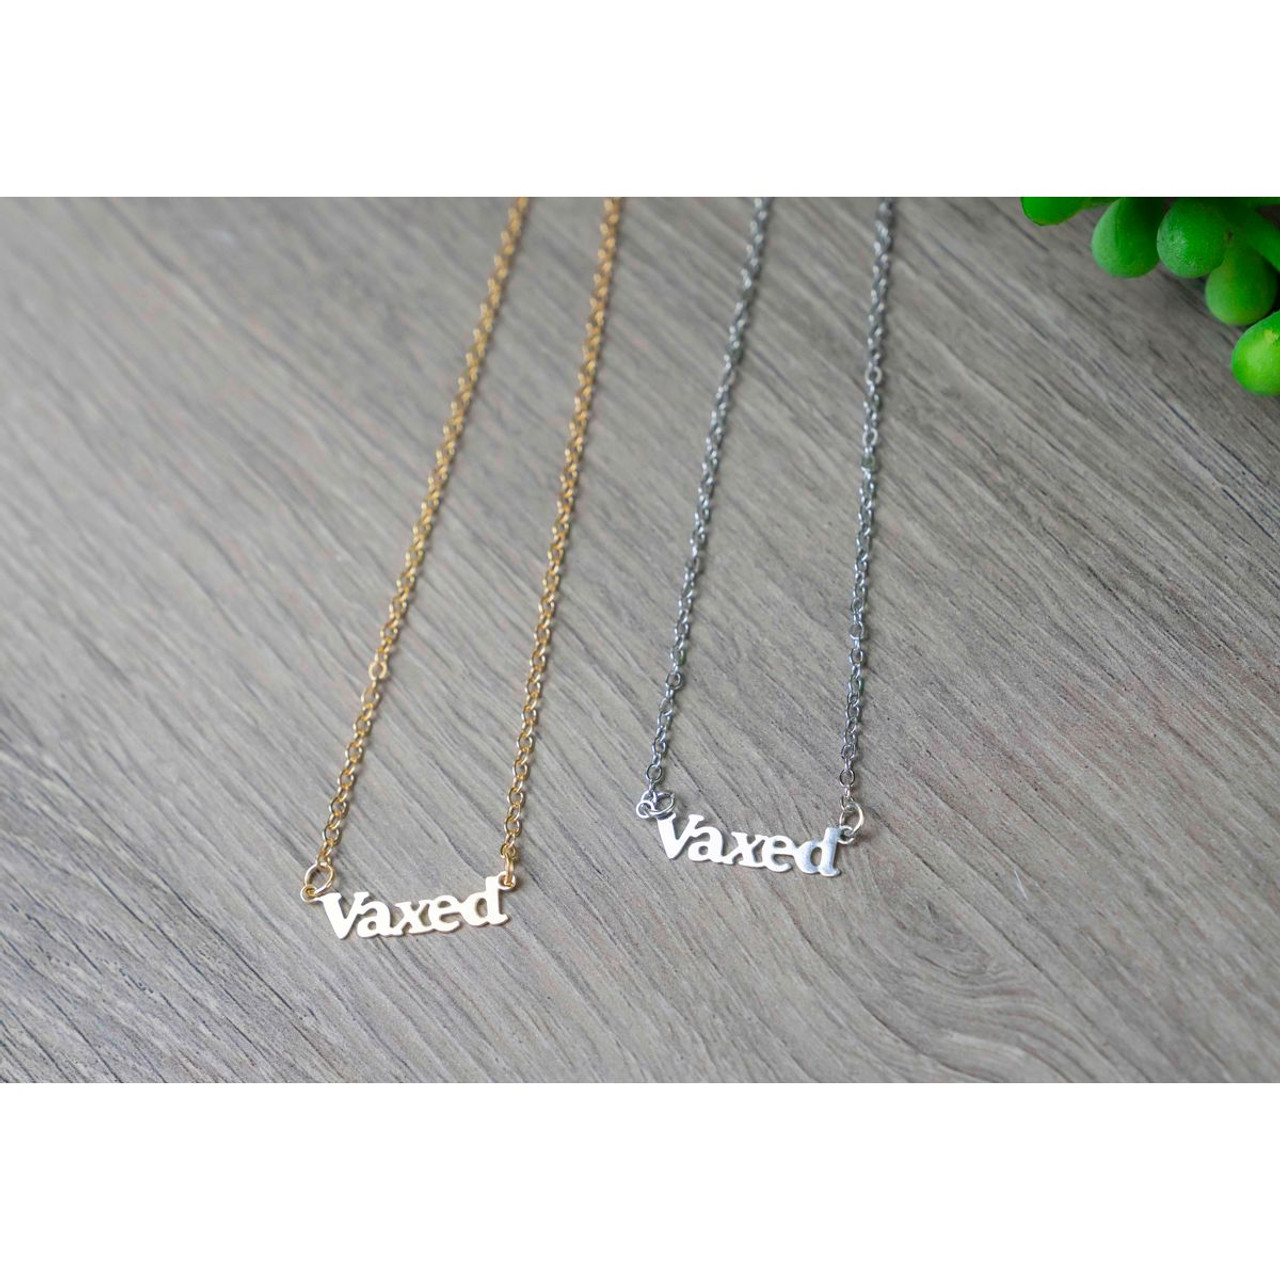 Vaxed Design Pendant Necklace product image